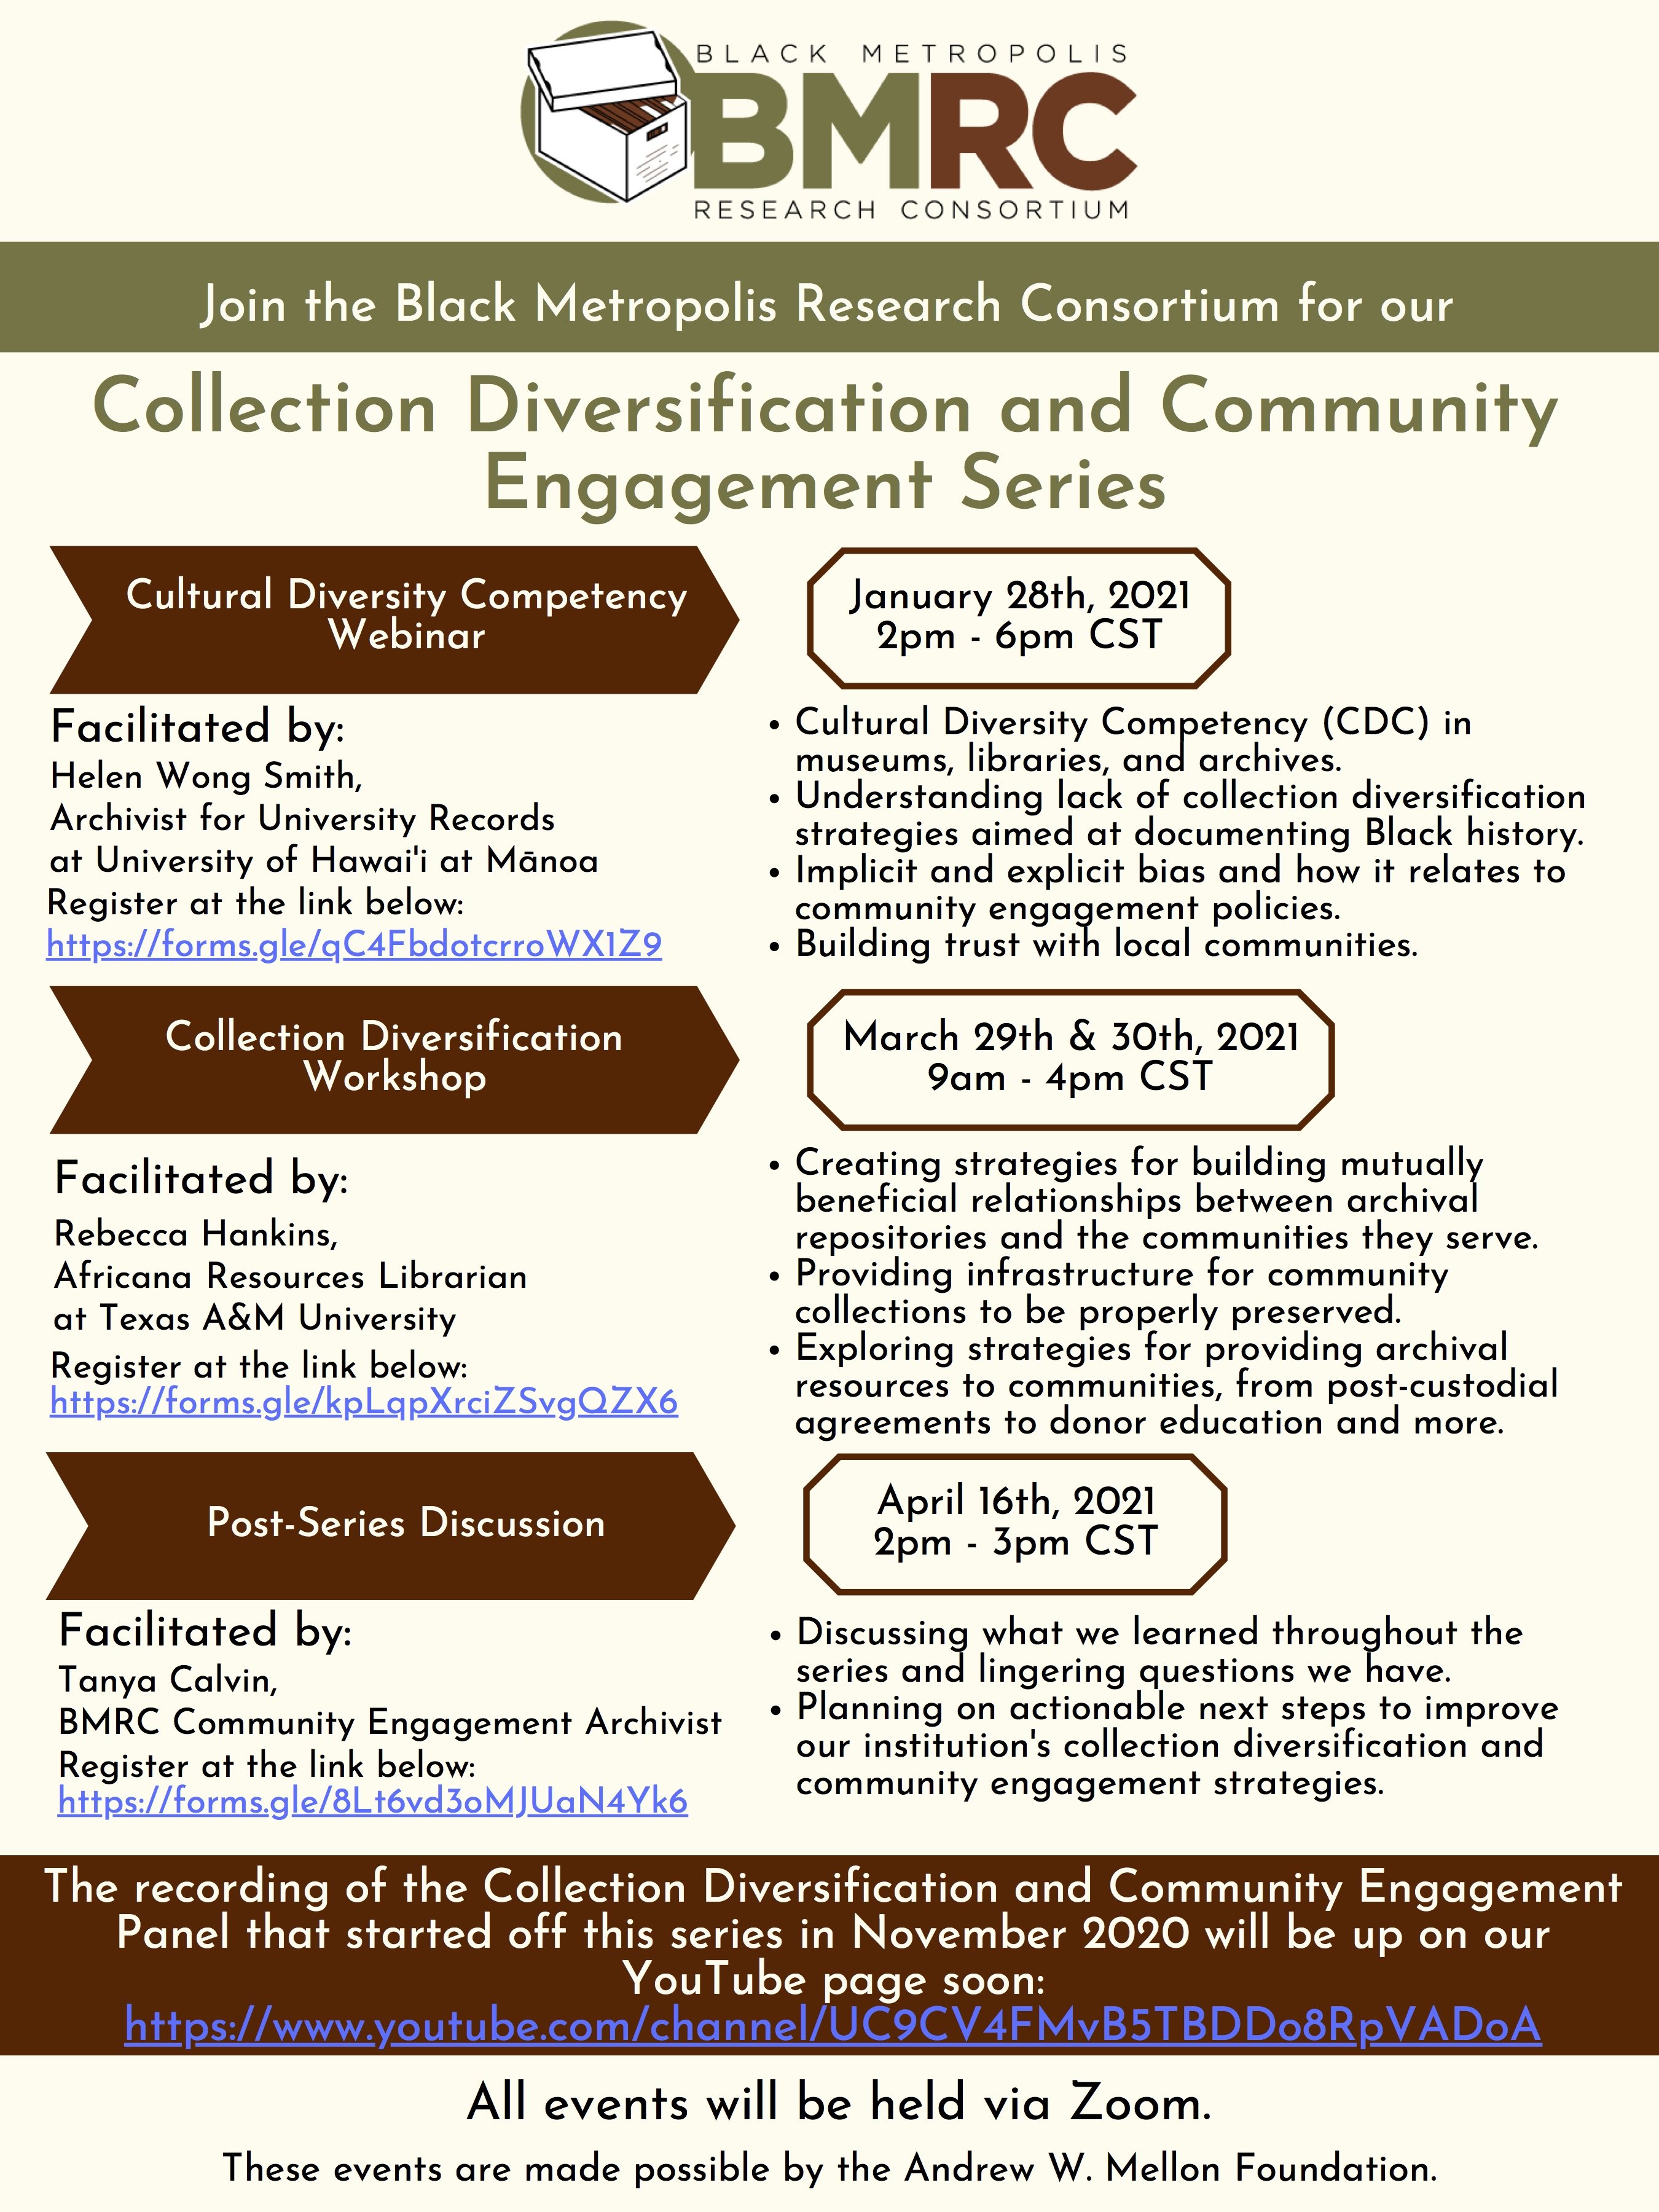 December 2020 BMRC Collection Diversification and Community Engagement Series Poster (1) copy.jpg